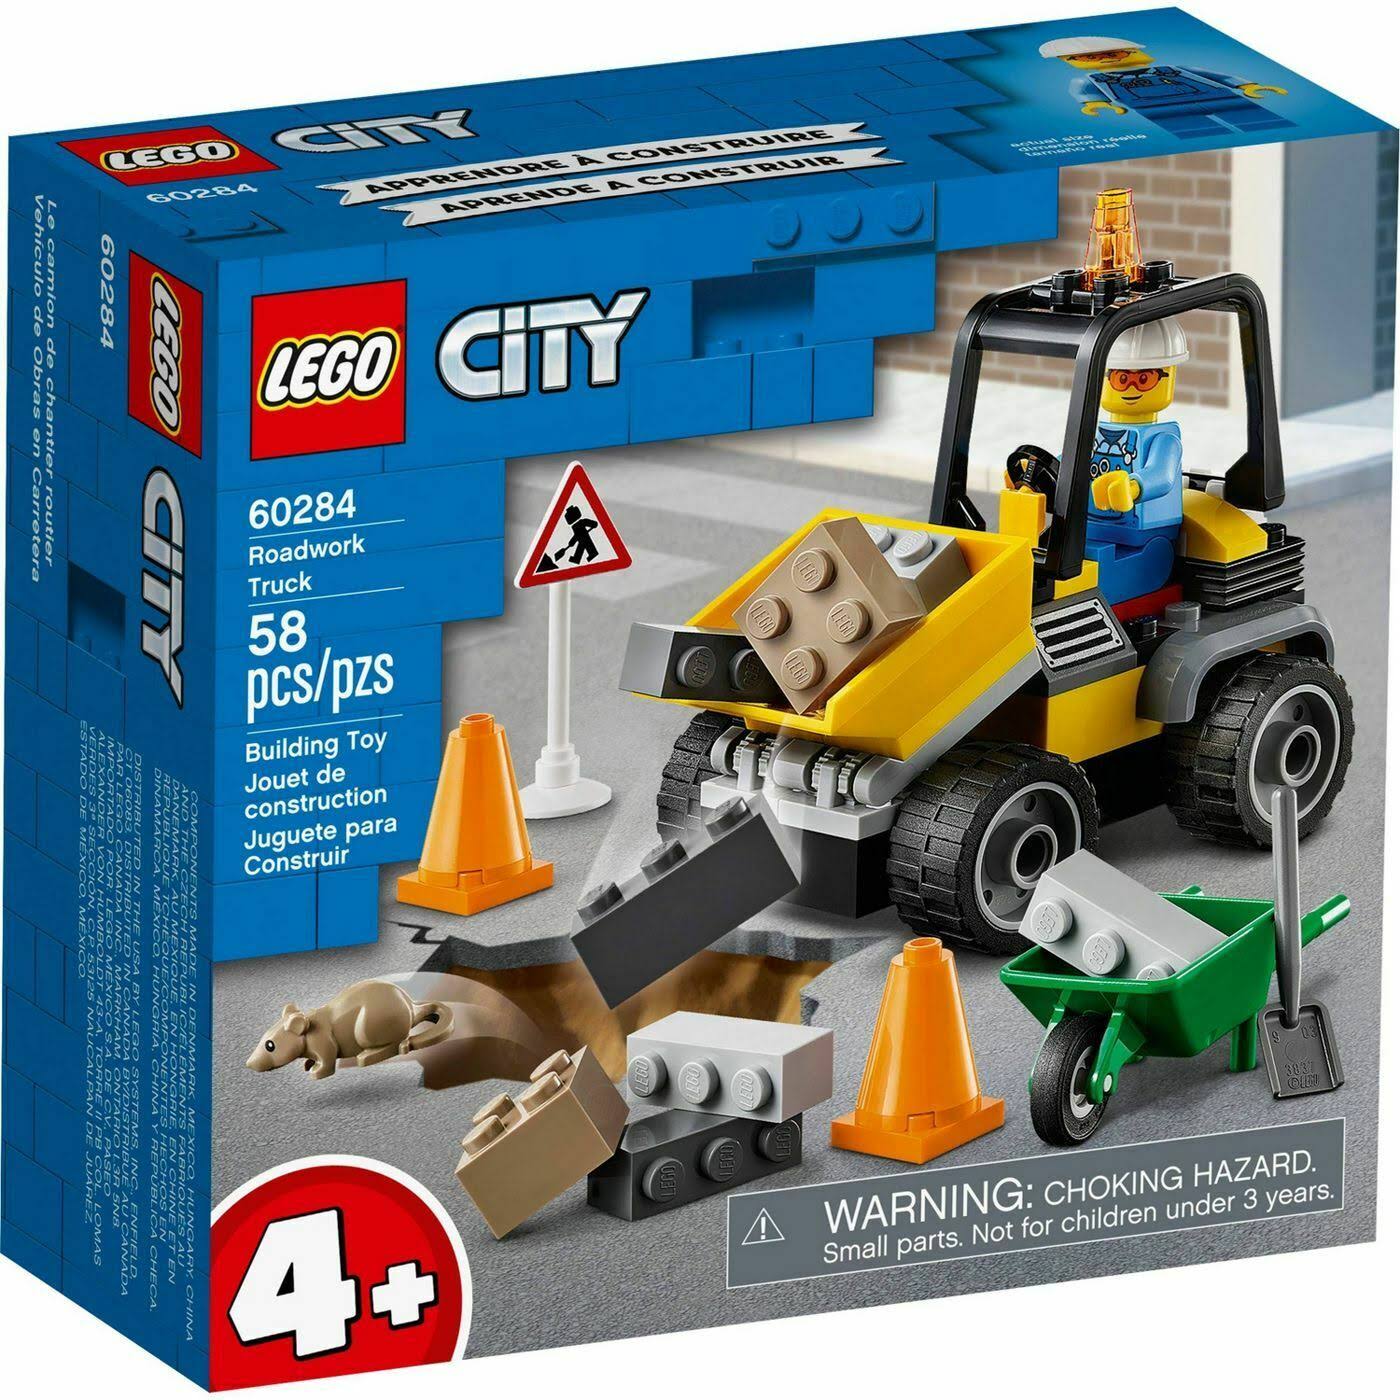 Lego 60284 City Roadwork Truck Building Kit New with Sealed Box